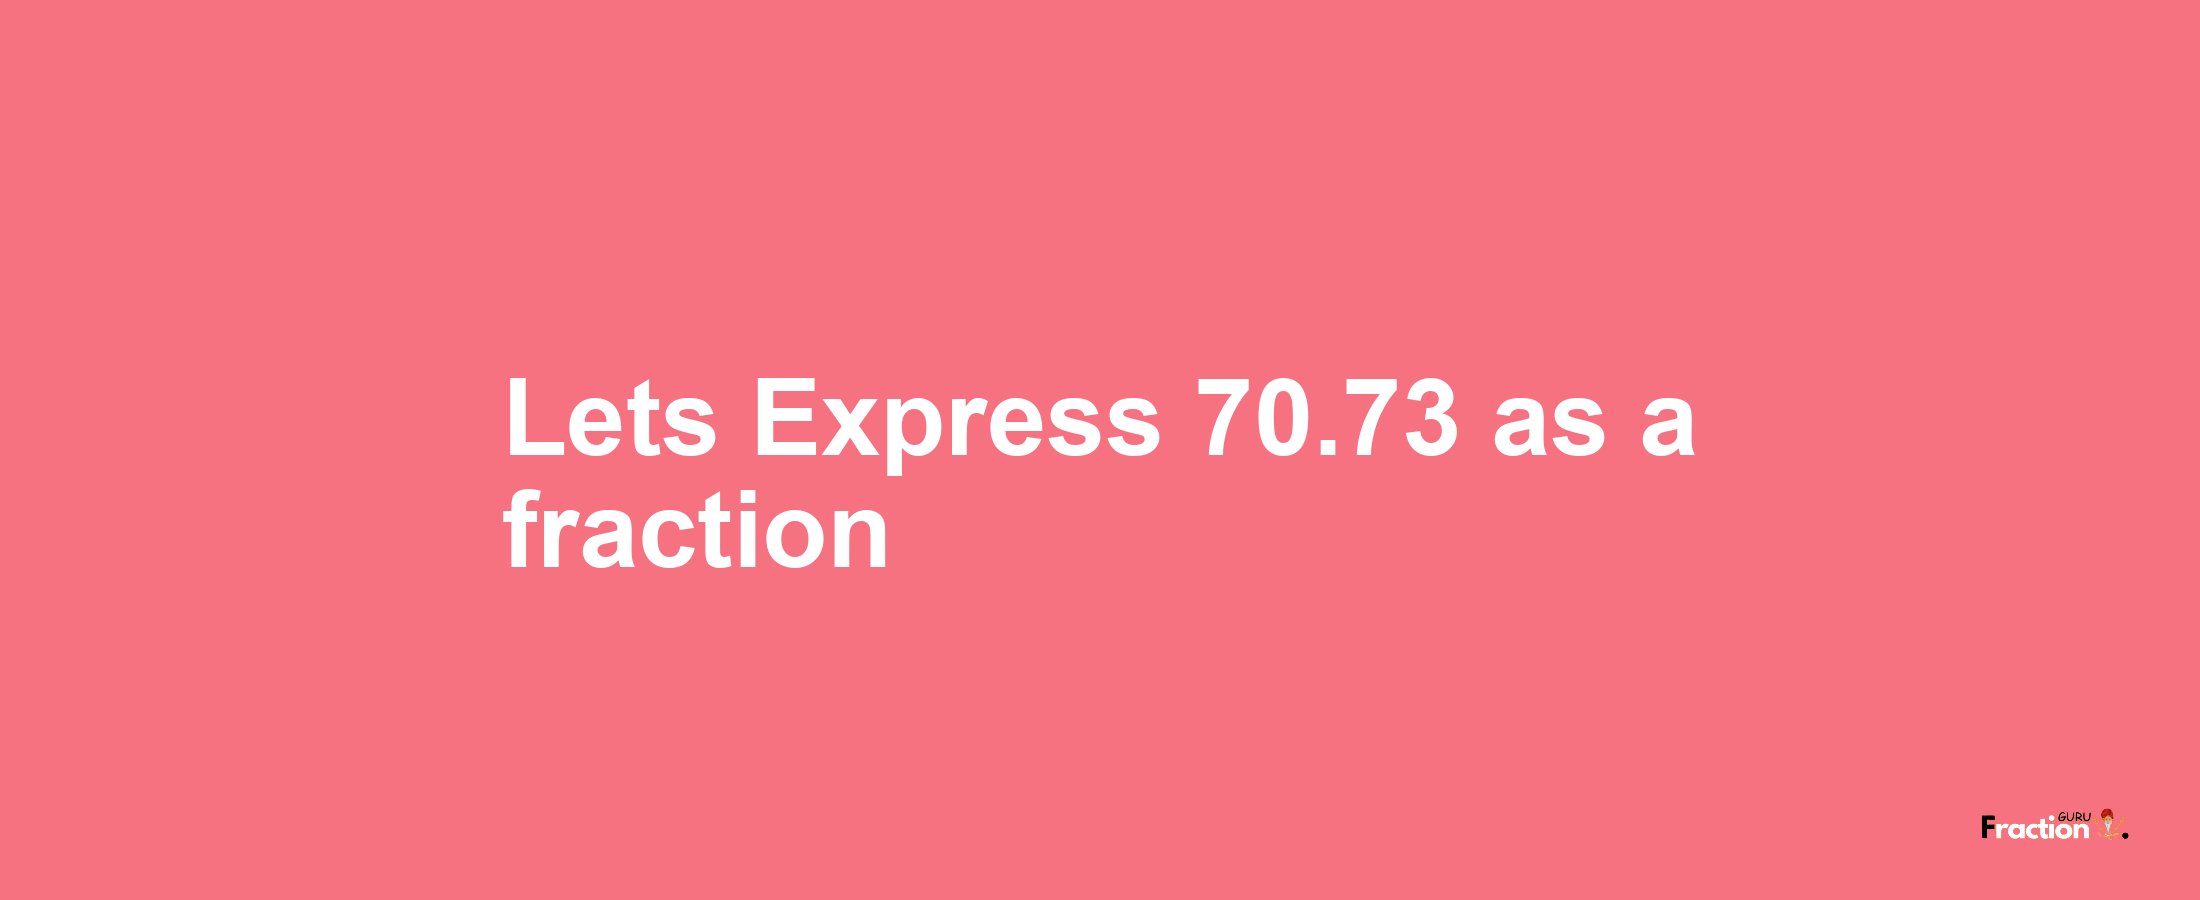 Lets Express 70.73 as afraction